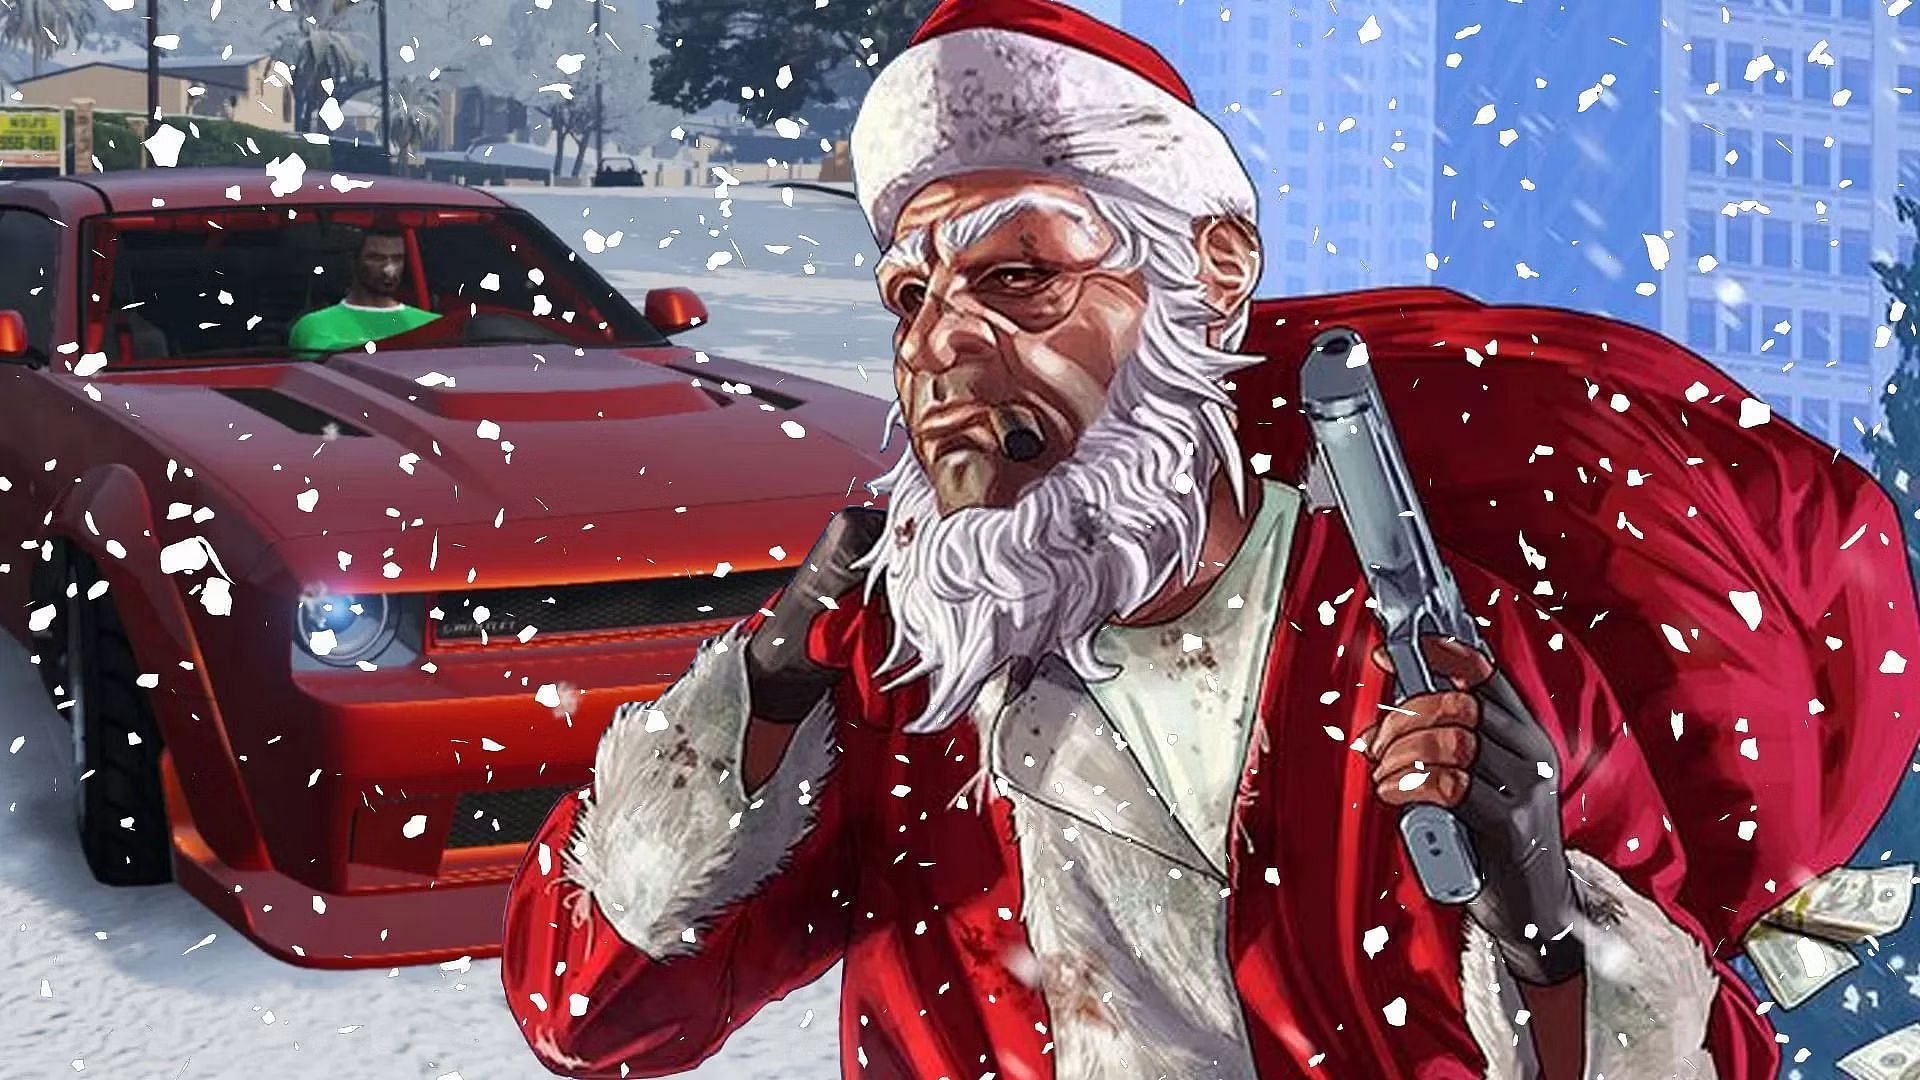 GTA Online Winter DLC update 2023 release date is hinted by Rockstar insider and it